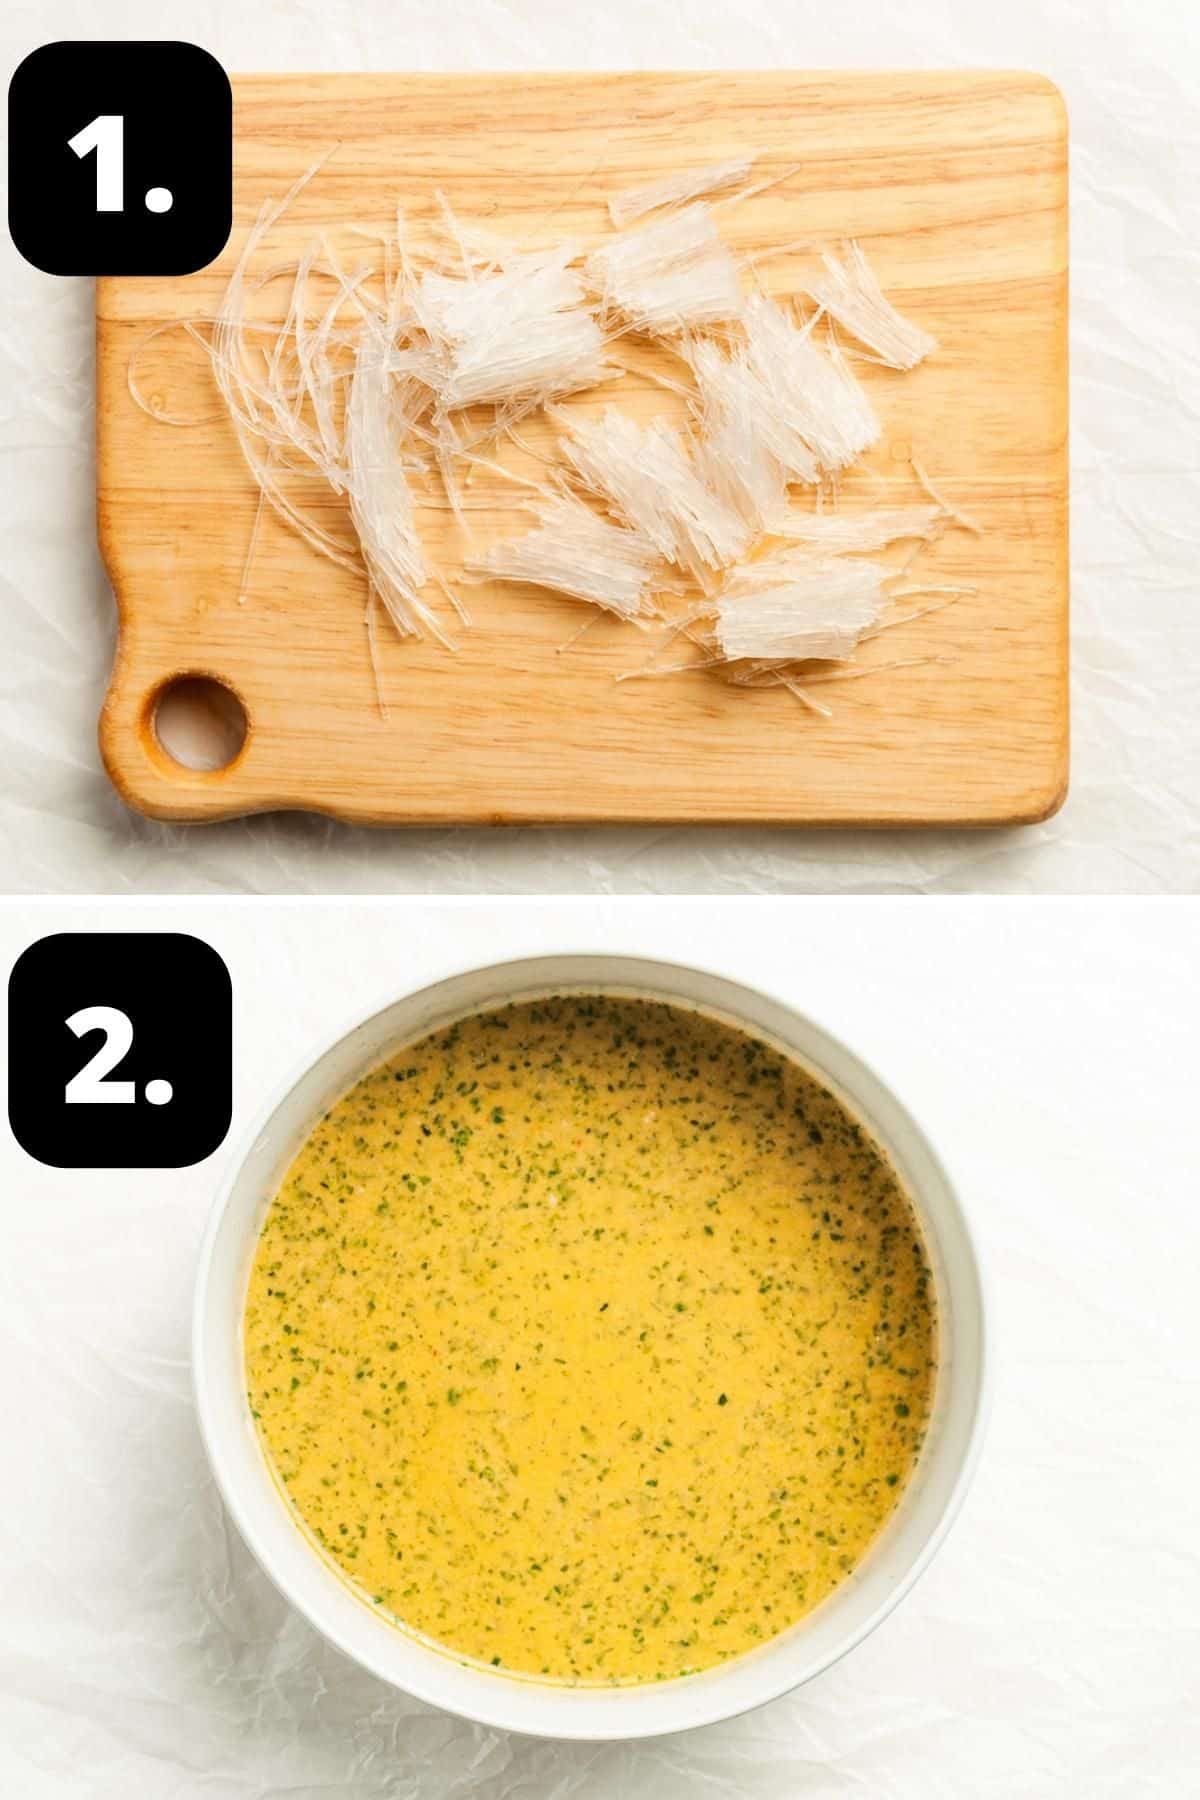 Steps 1-2 of preparing this recipe - cutting the noodles and the sauce base of the recipe in a bowl.